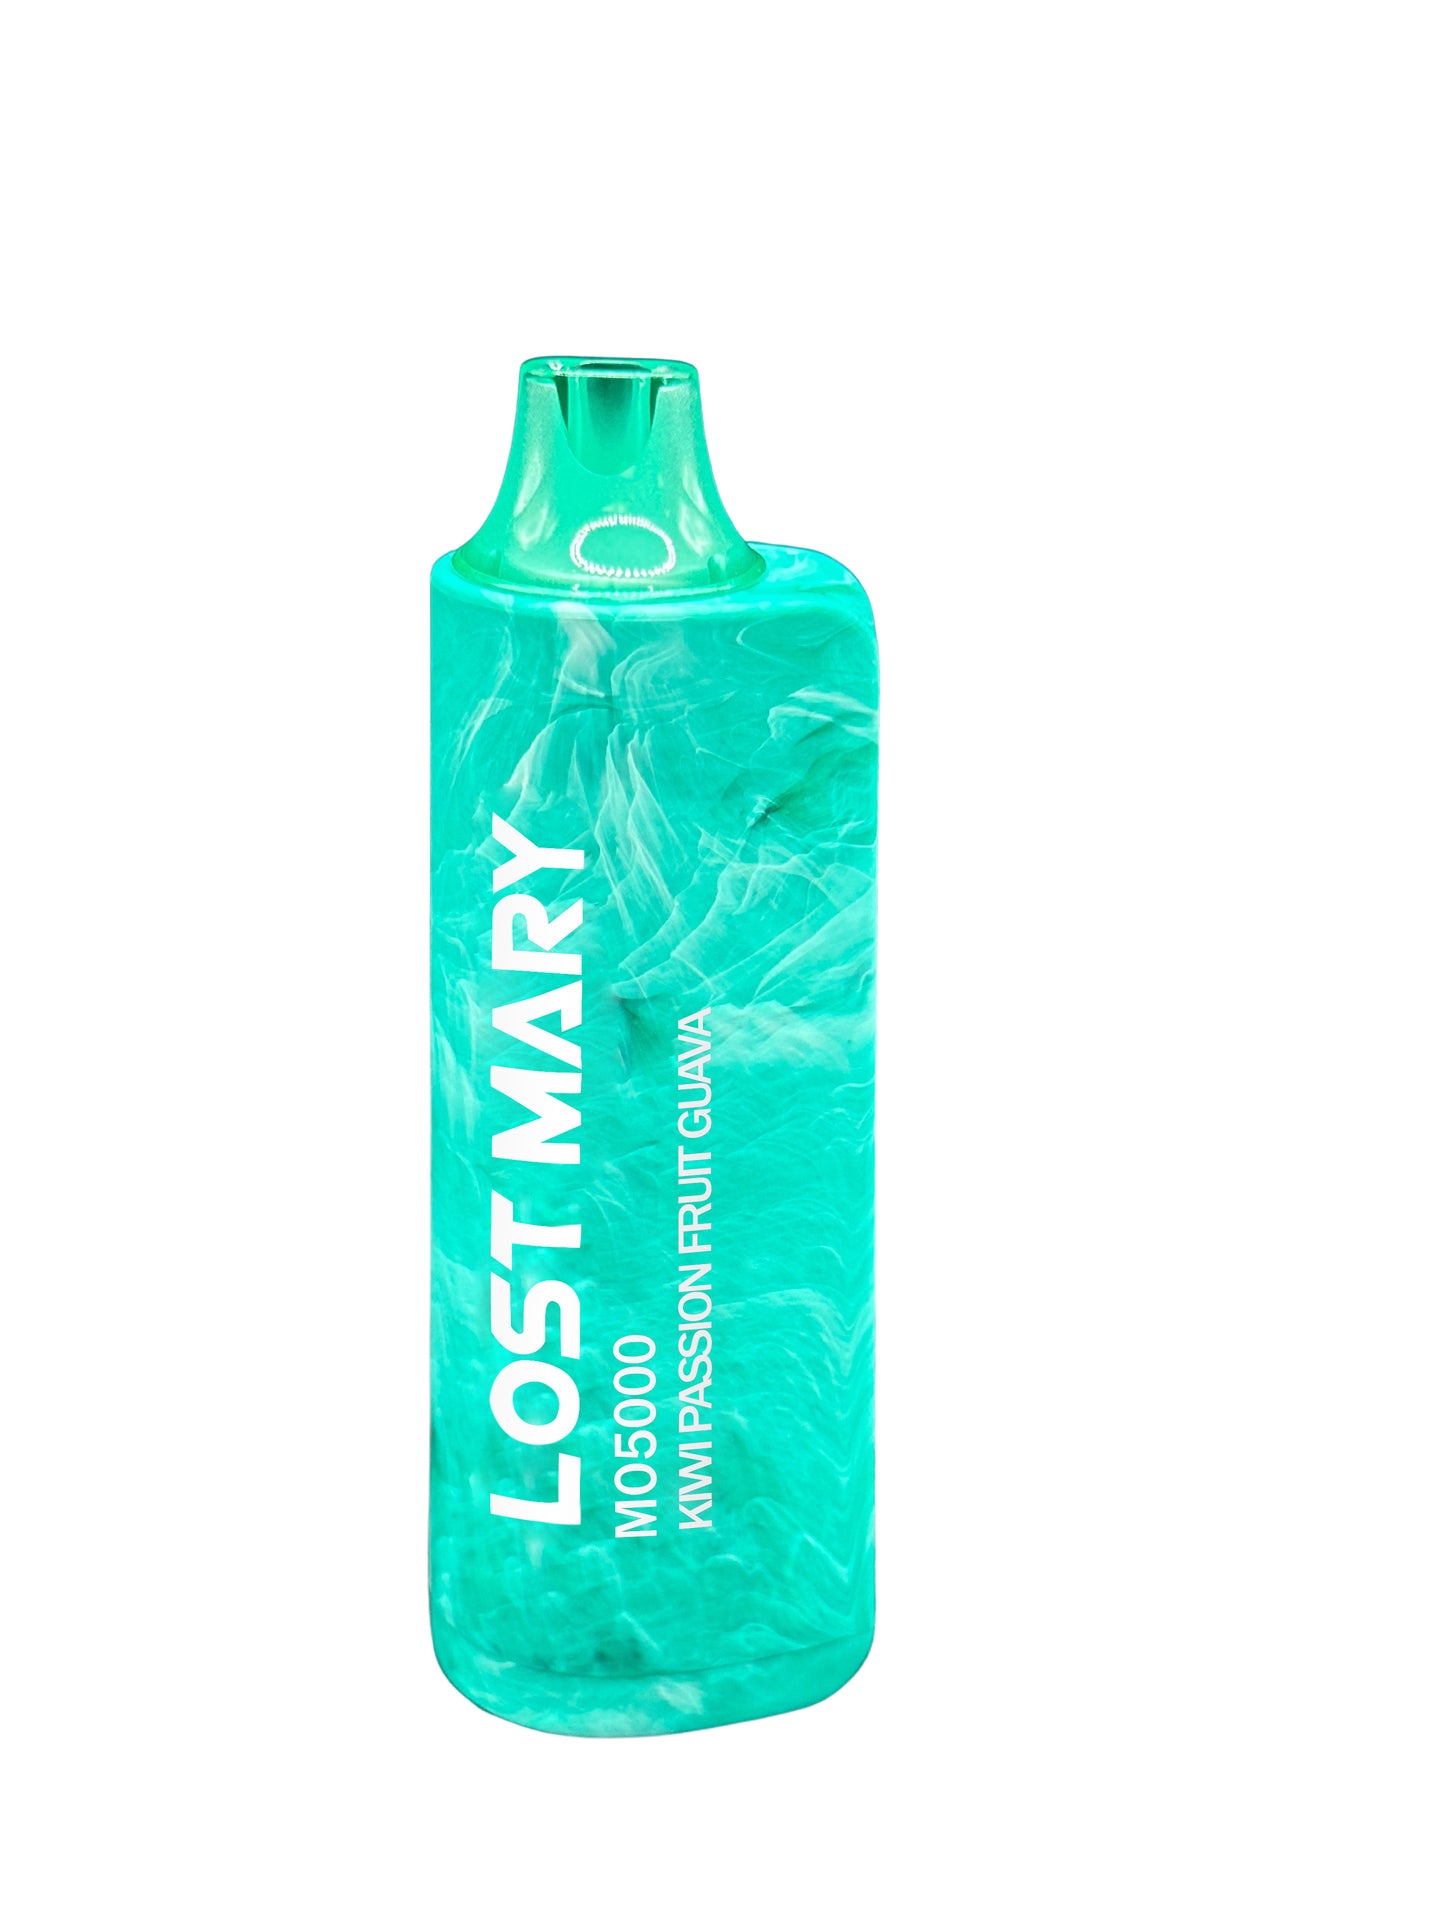 Vape Central Wholesale| Lost Marry Mo5000 | Disposable vape wholesale| Lost Mary MO5000 vape wholesale| lost mary mo5000 flavor kiwi passion fruit guava